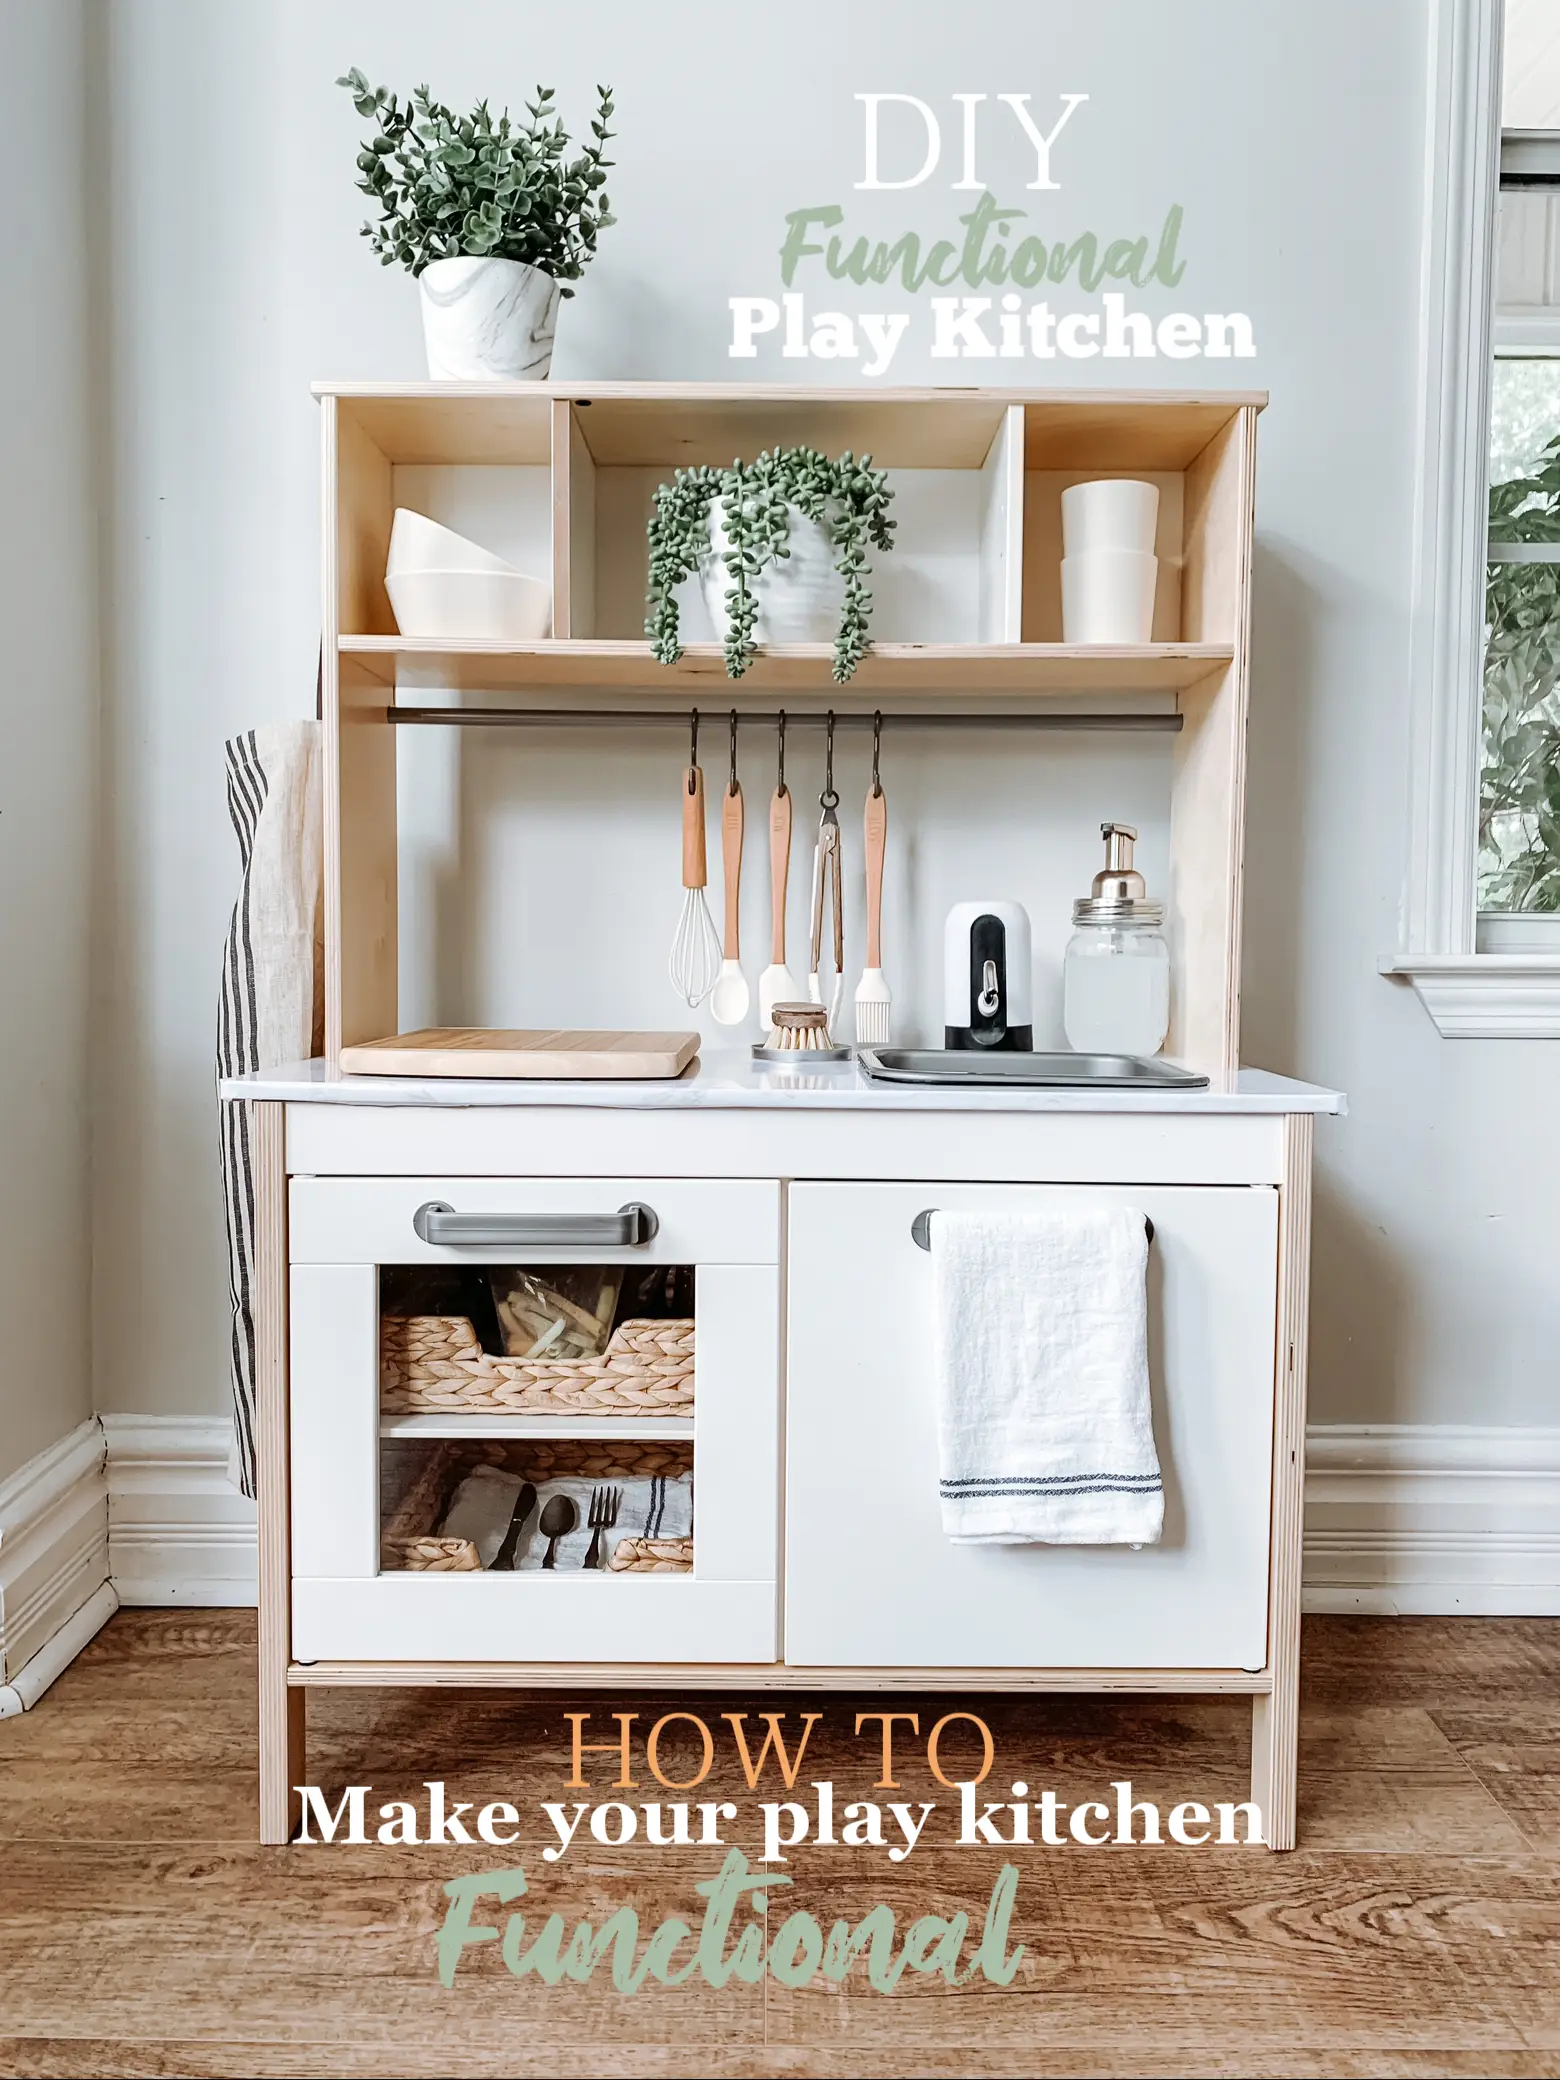 DIY Functional Play Kitchen! 😍, Video published by Tawny